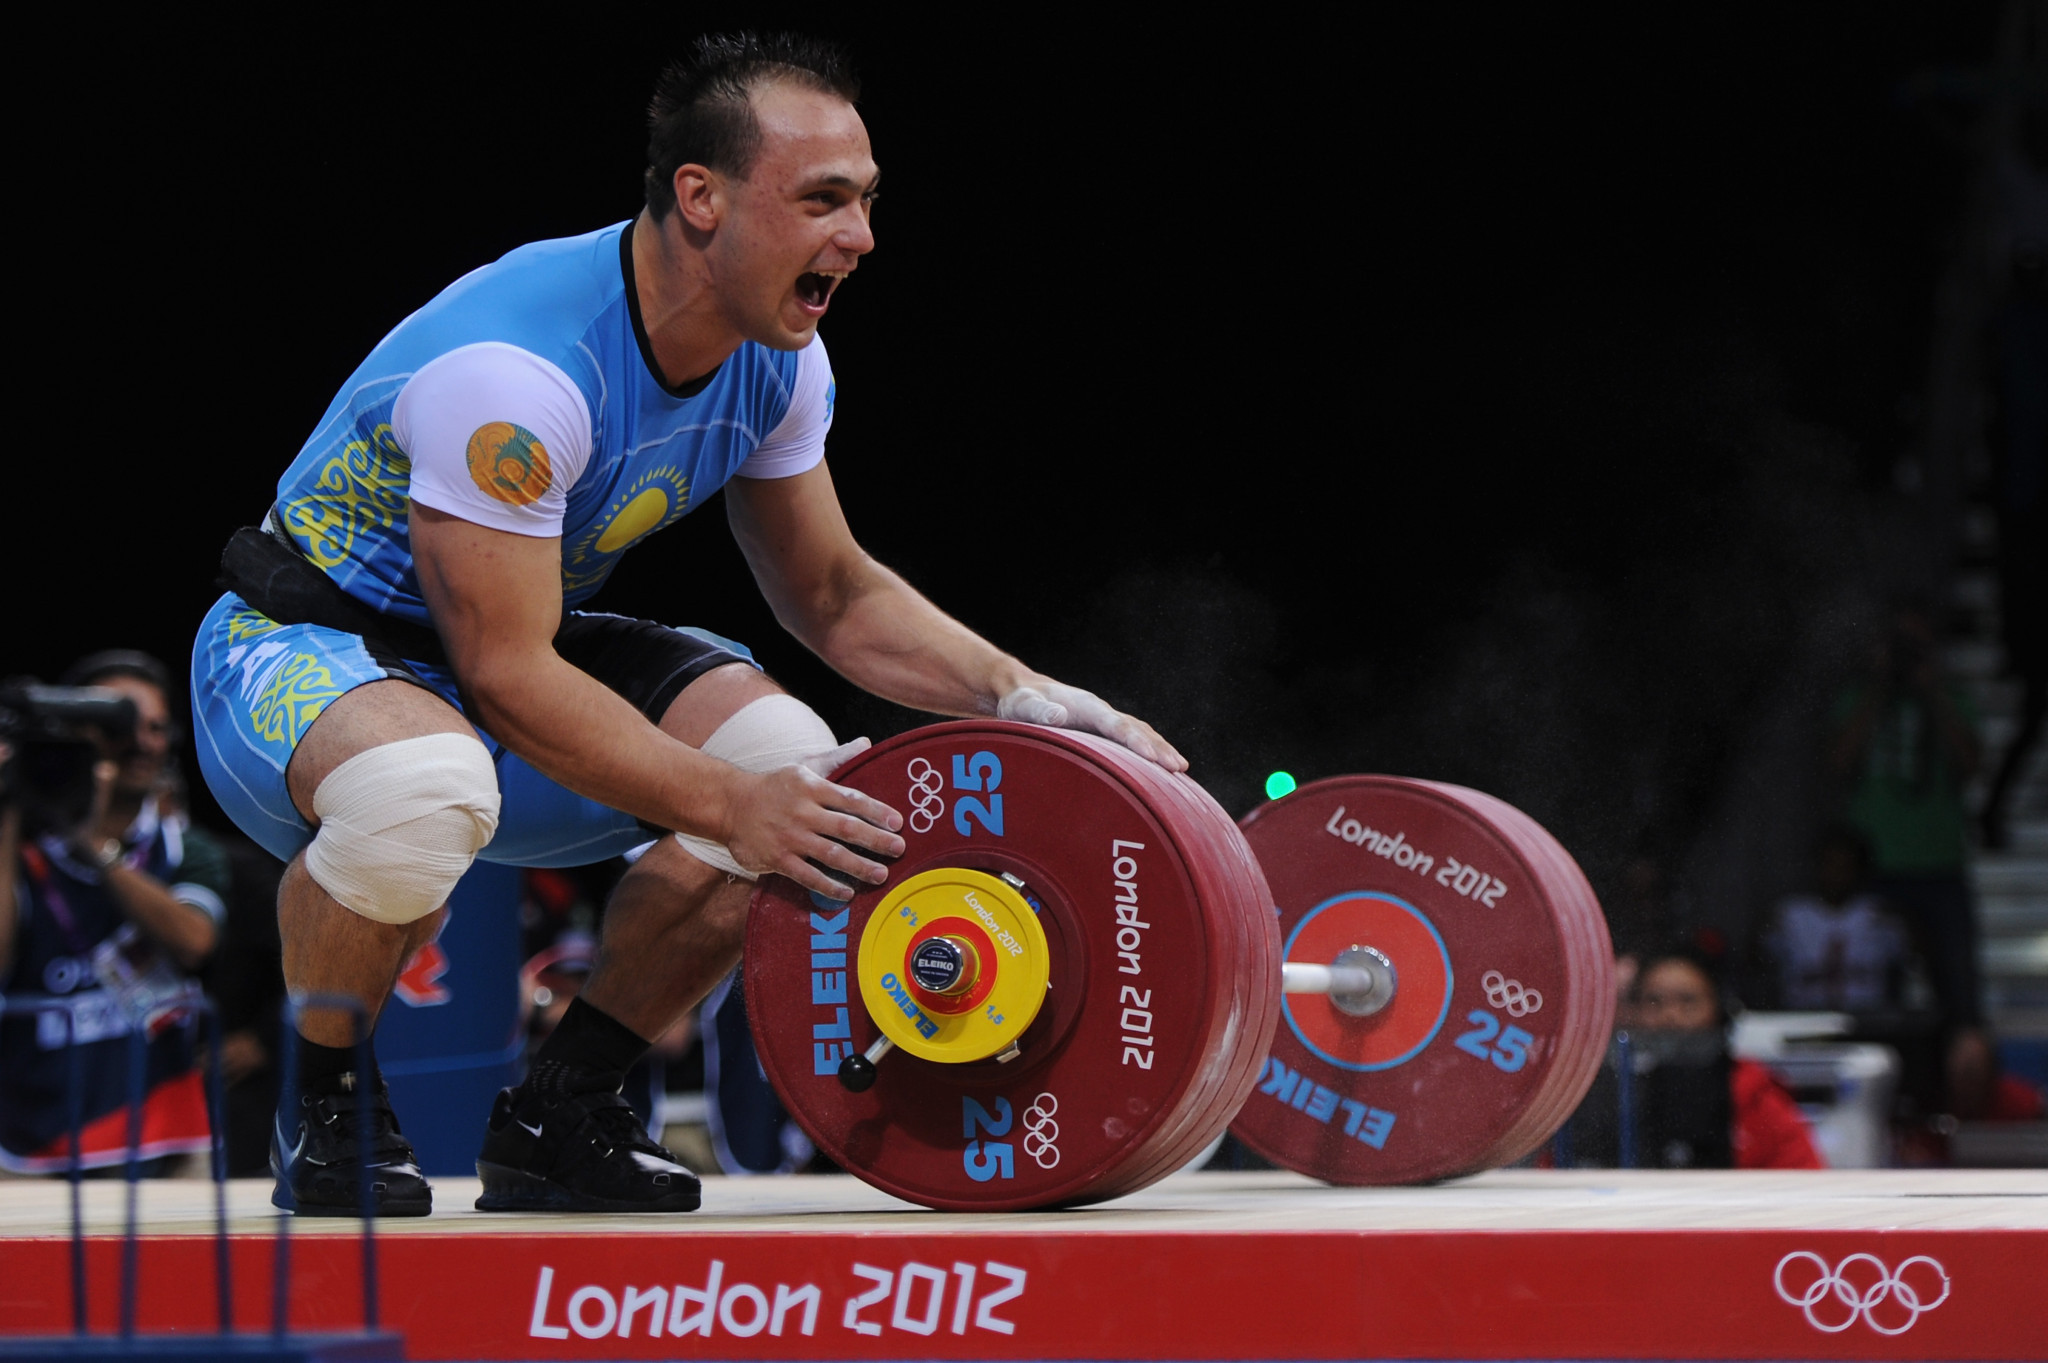 Weightlifting has introduced a new Olympic qualifying system as part of a bid to faze out cheats  ©Getty Images